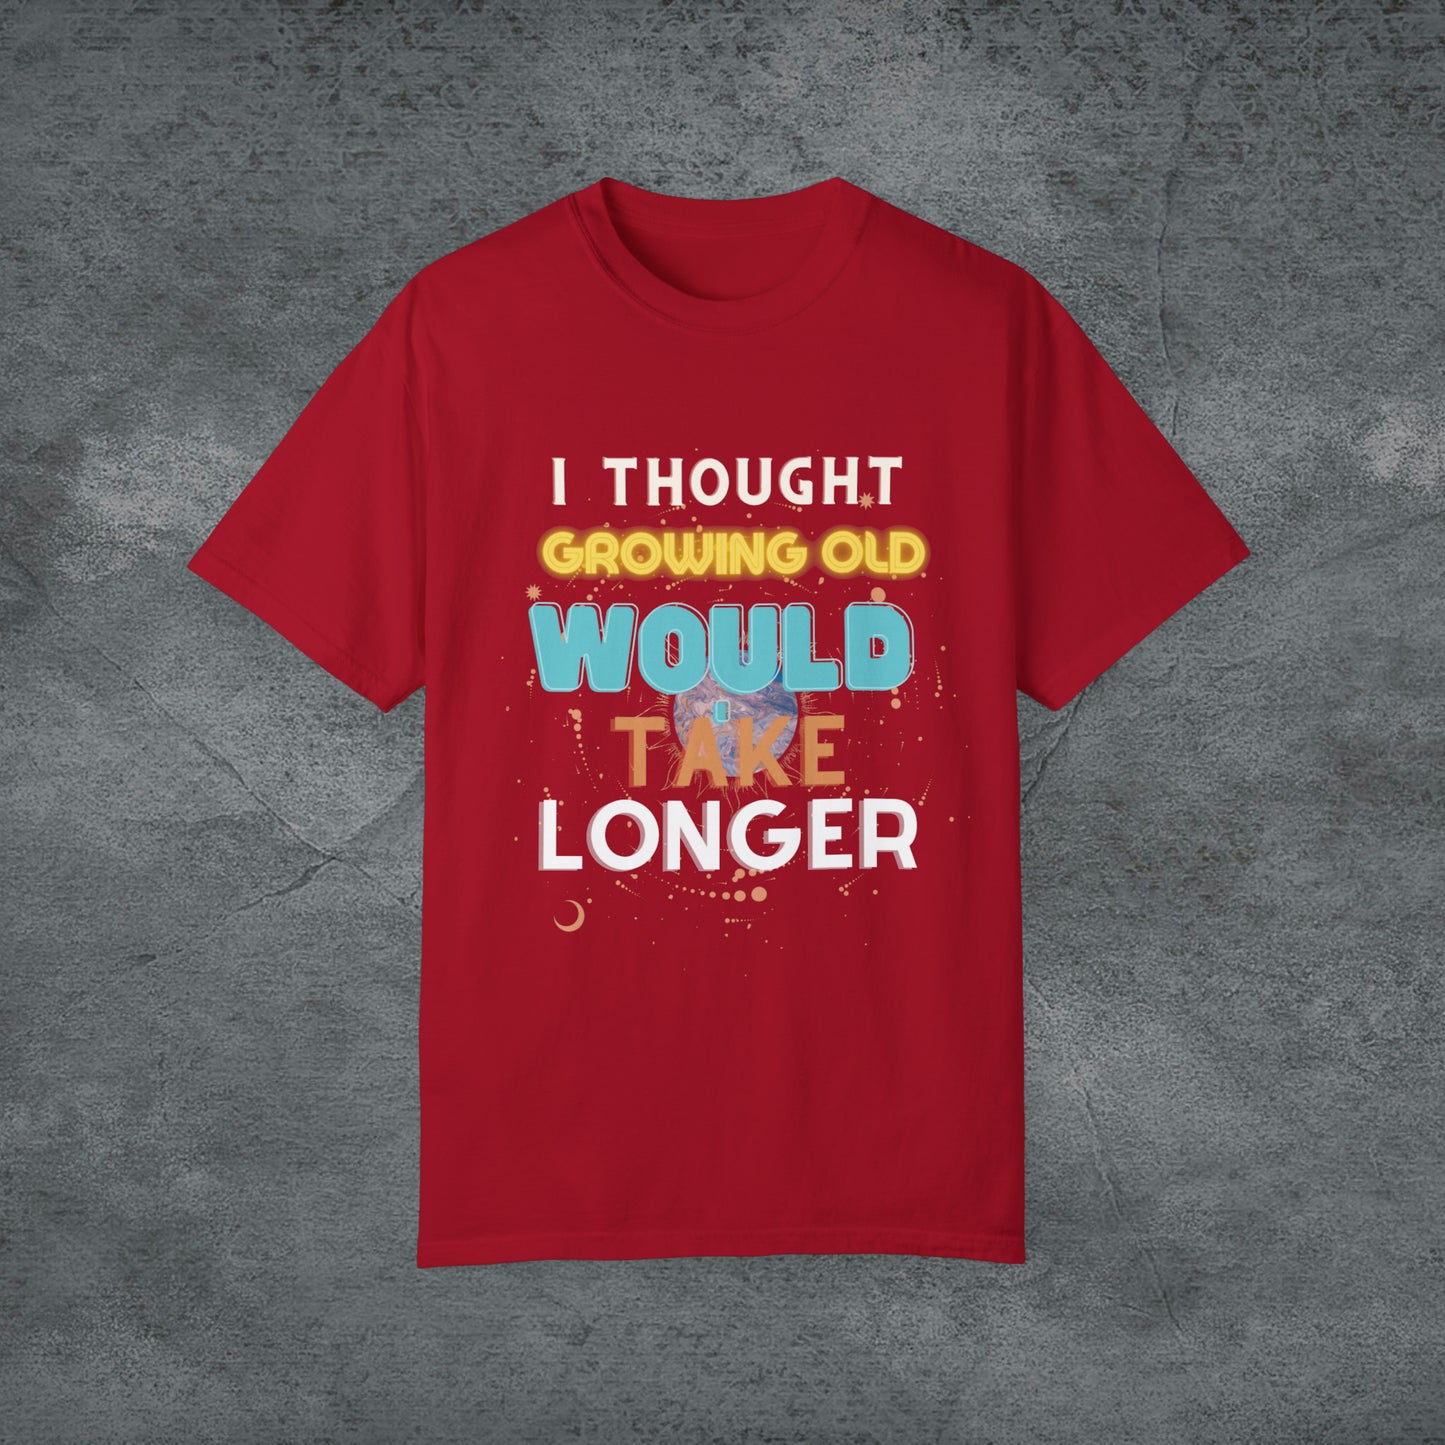 I Thought Growing Old Would Take Longer T-Shirt | Getting Older T Shirt | Funny Adulting T-Shirt | Old Age T Shirt | Old Person T Shirt T-Shirt Red S 